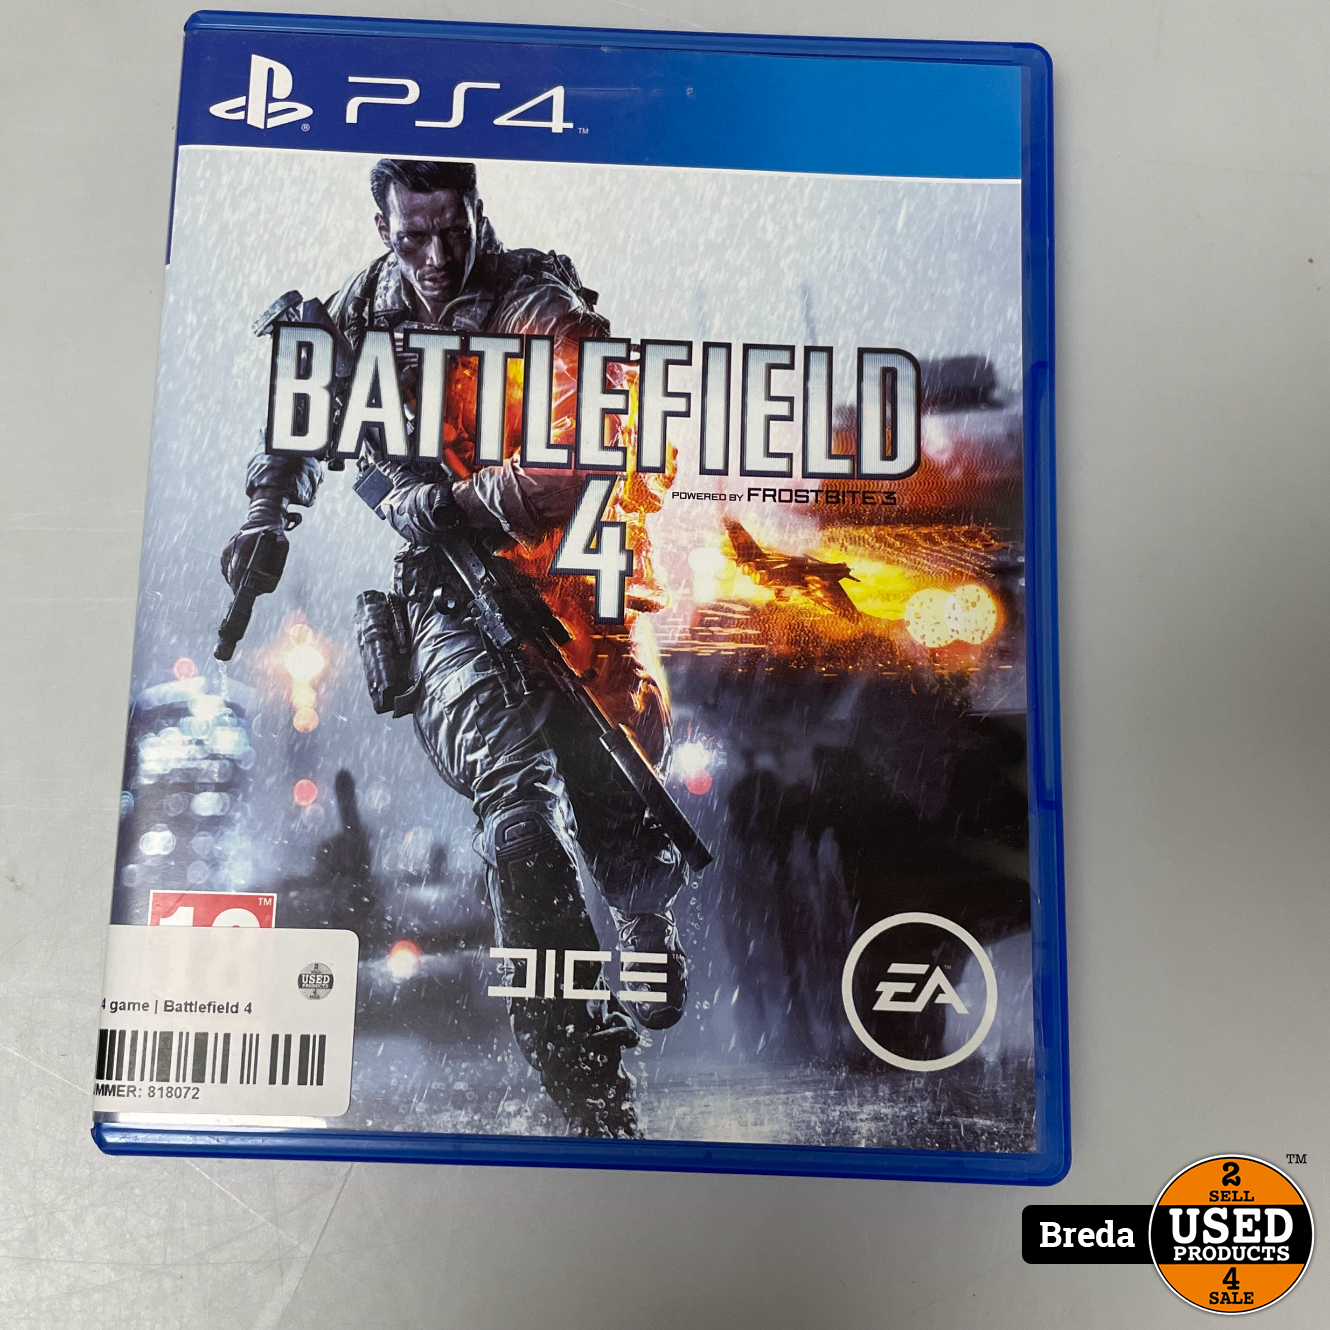 Playstation 4 game | Battlefield Used Products Breda